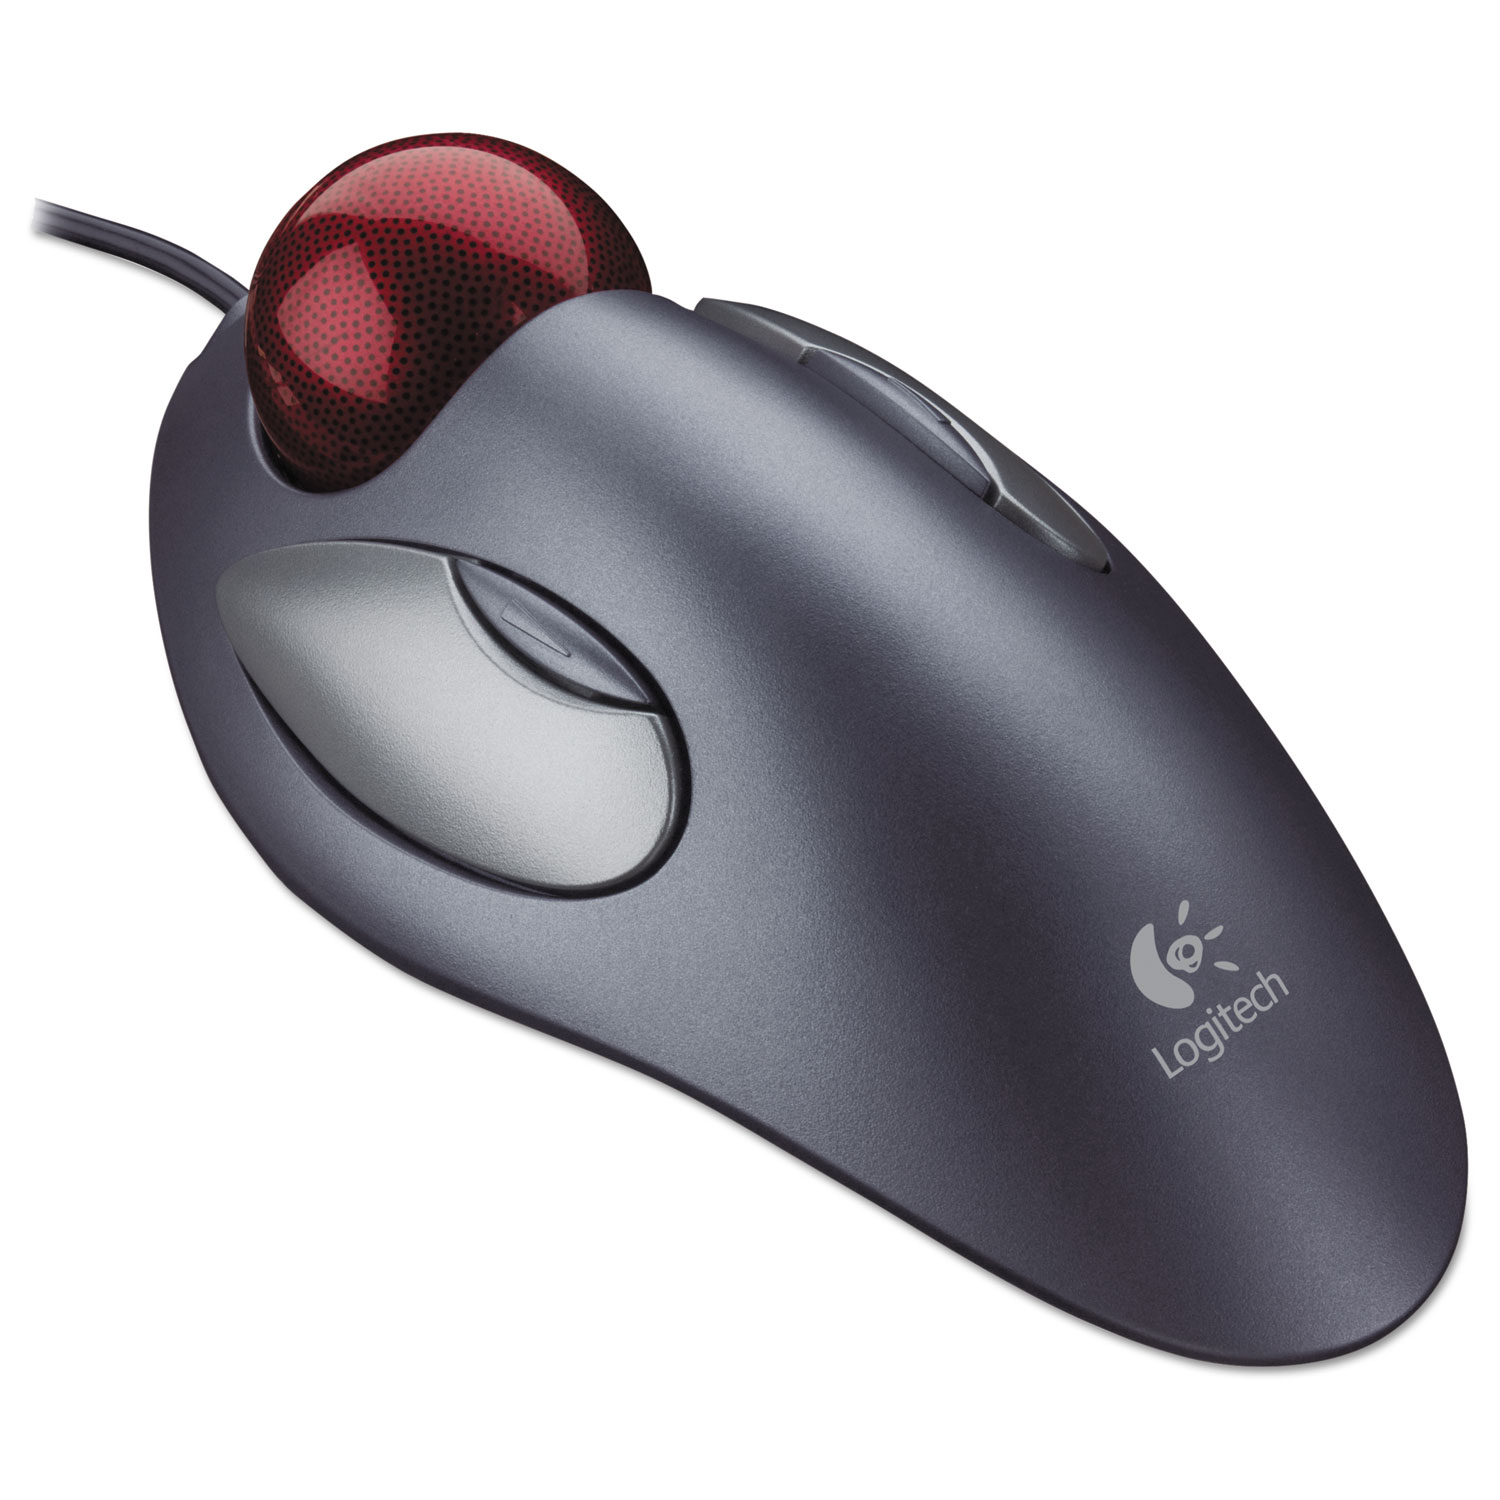 Trackman Marble Mouse, USB 1.0, Left/Right Hand Use, Gray/Red